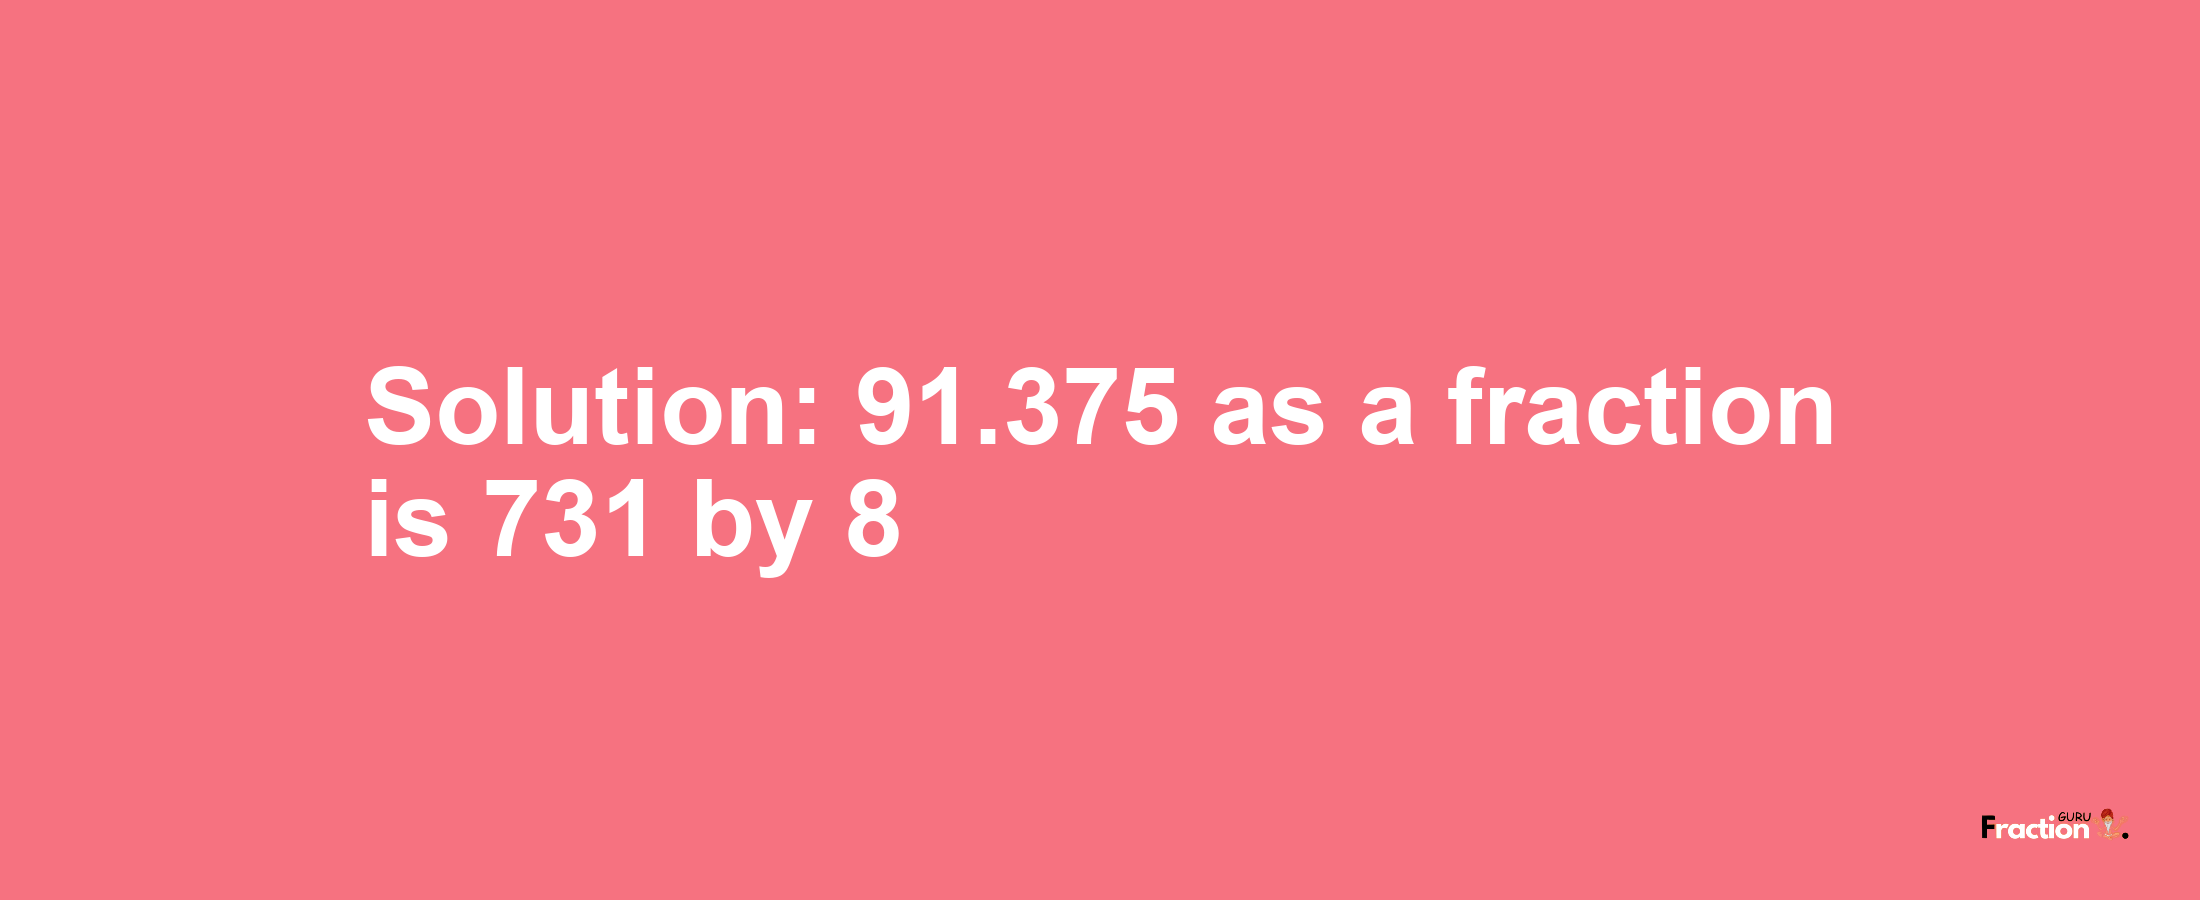 Solution:91.375 as a fraction is 731/8